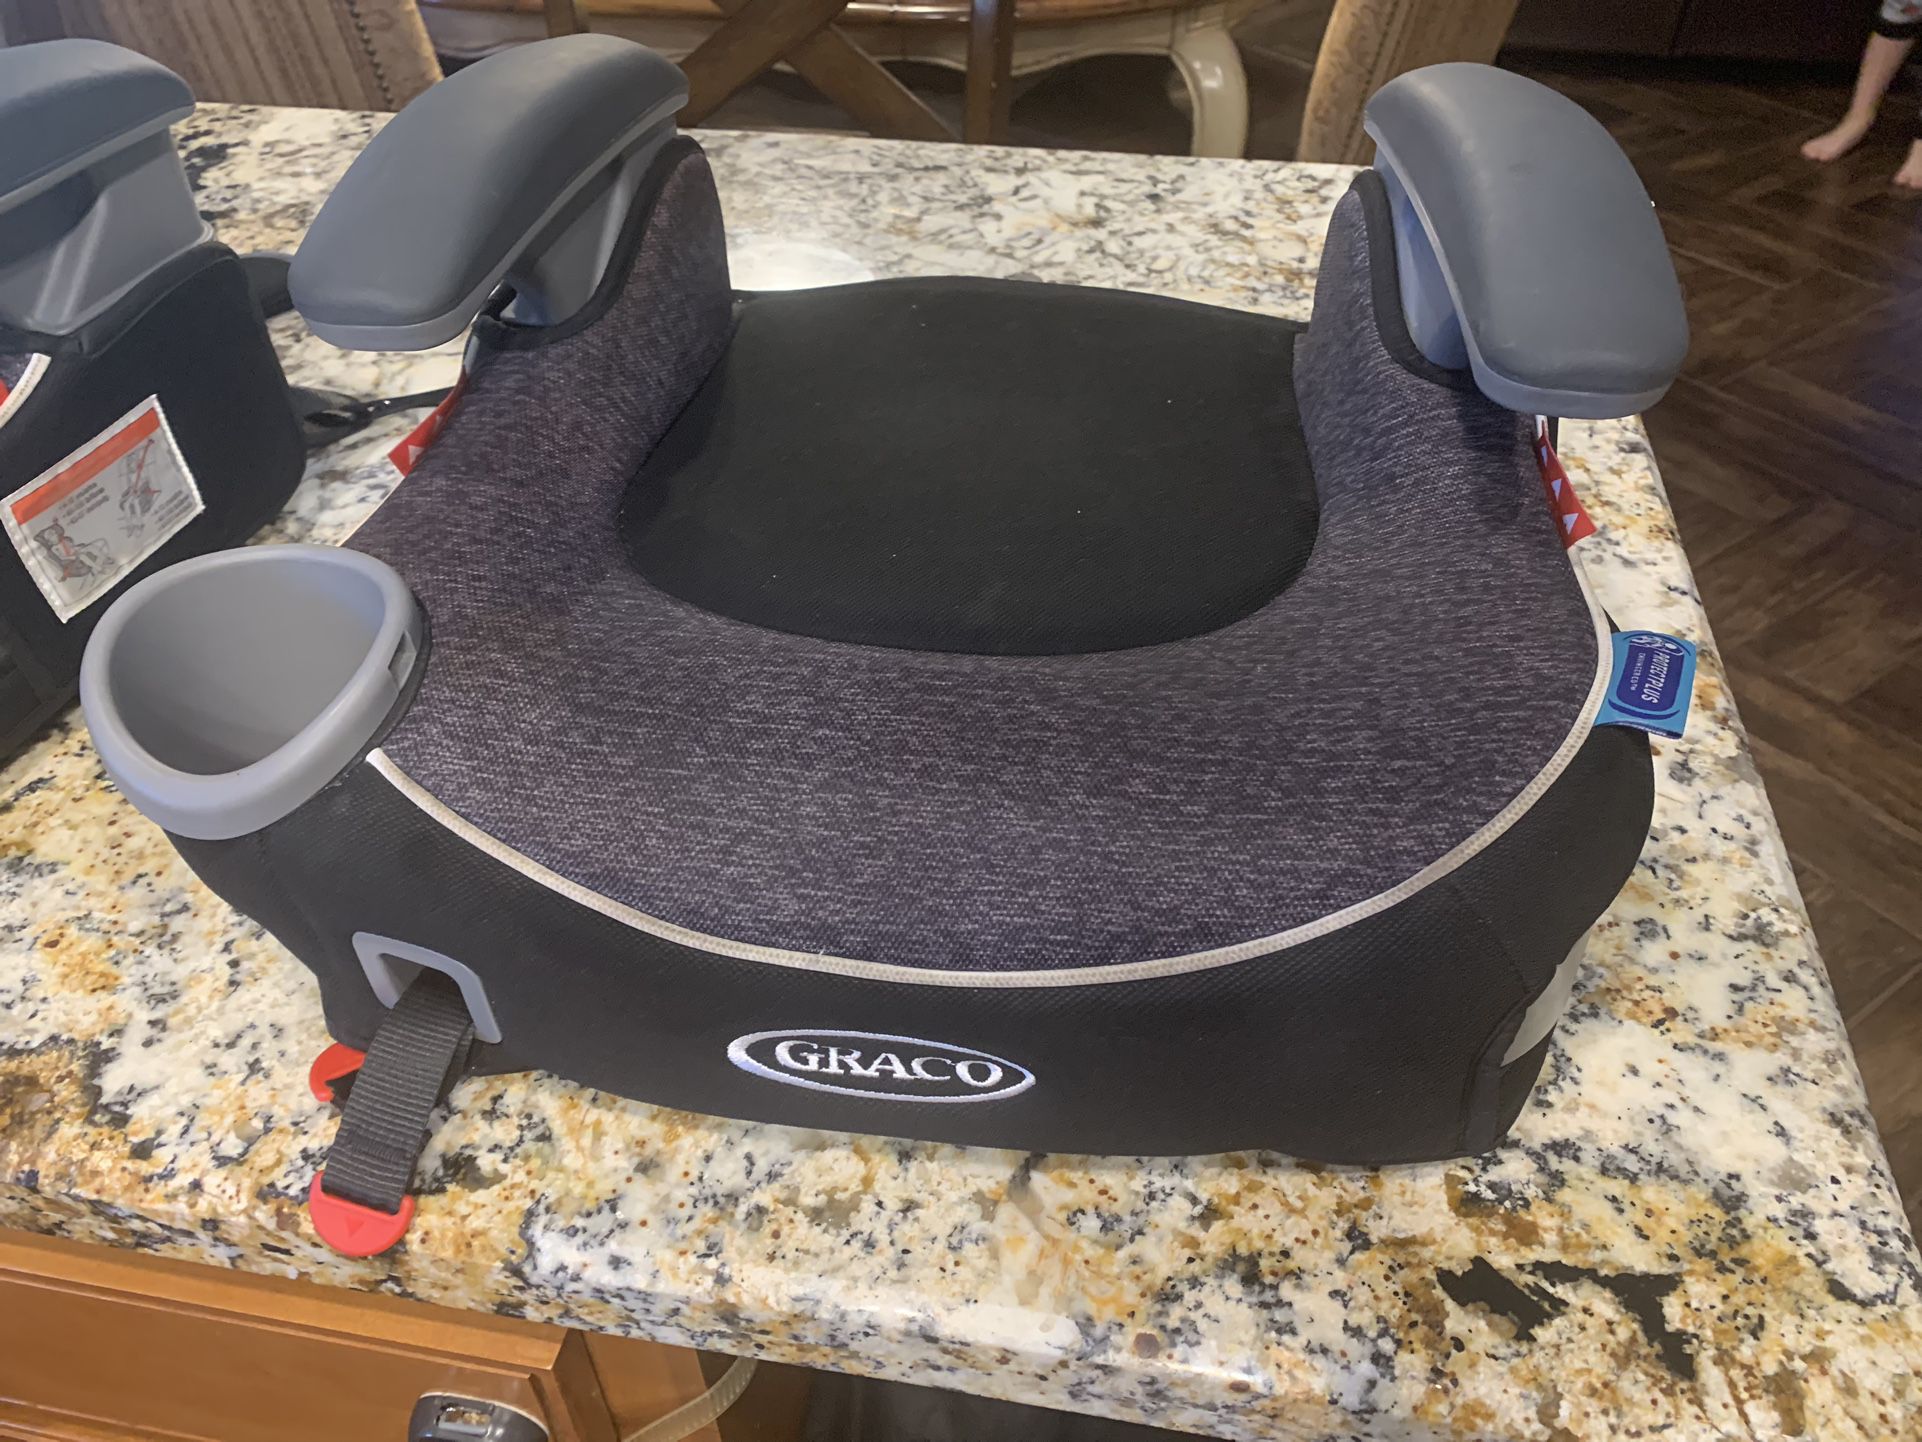 (Two) Graco Turbo Booster Backless Booster Seat - Great Condition - Gently Used - Two seats